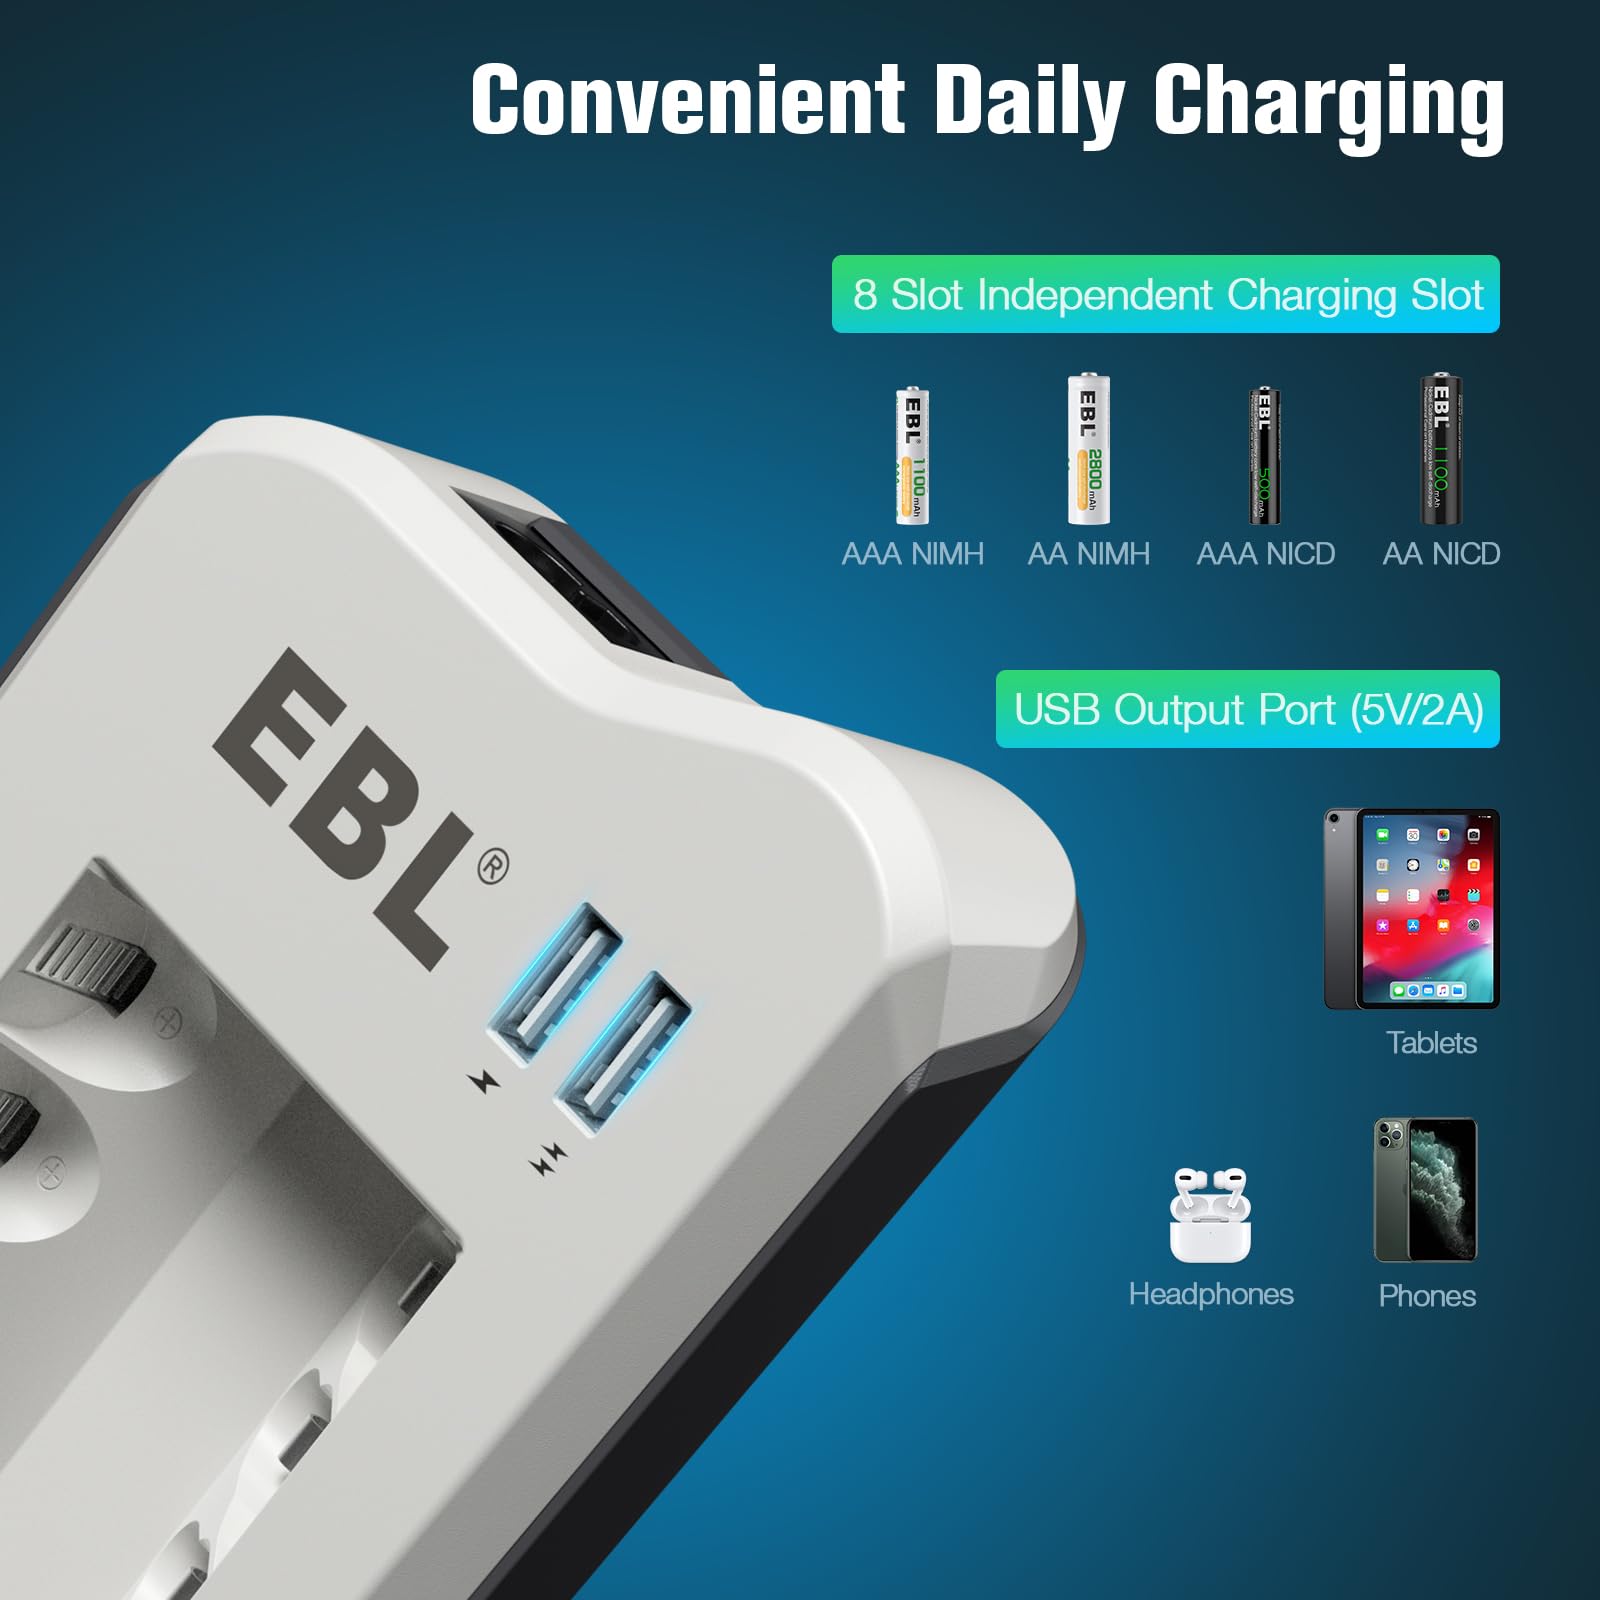 EBL Smart Battery Charger with 2 USB Charging Port and AA AAA Rechargeable Batteries Combo